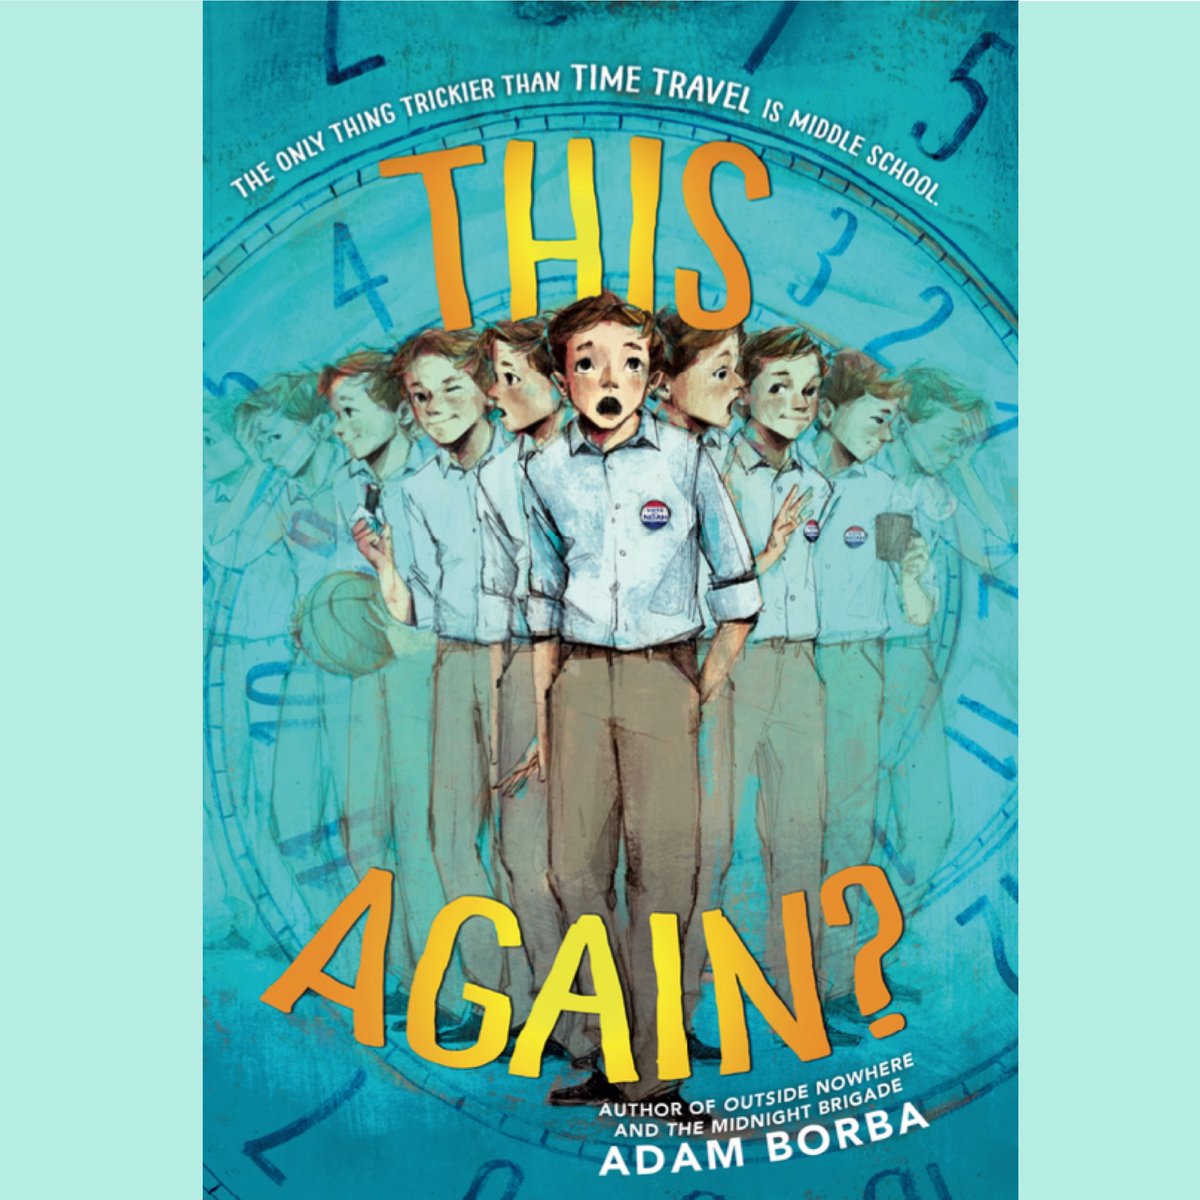 Ready to reload your To Be Read pile? B&N is giving 25% off preorders with code: PREORDER25 And check out THIS AGAIN - a middle grade novel about the misadventures of a kid attempting to orchestrate the perfect day with the help of his future self and a time machine. @BNBuzz